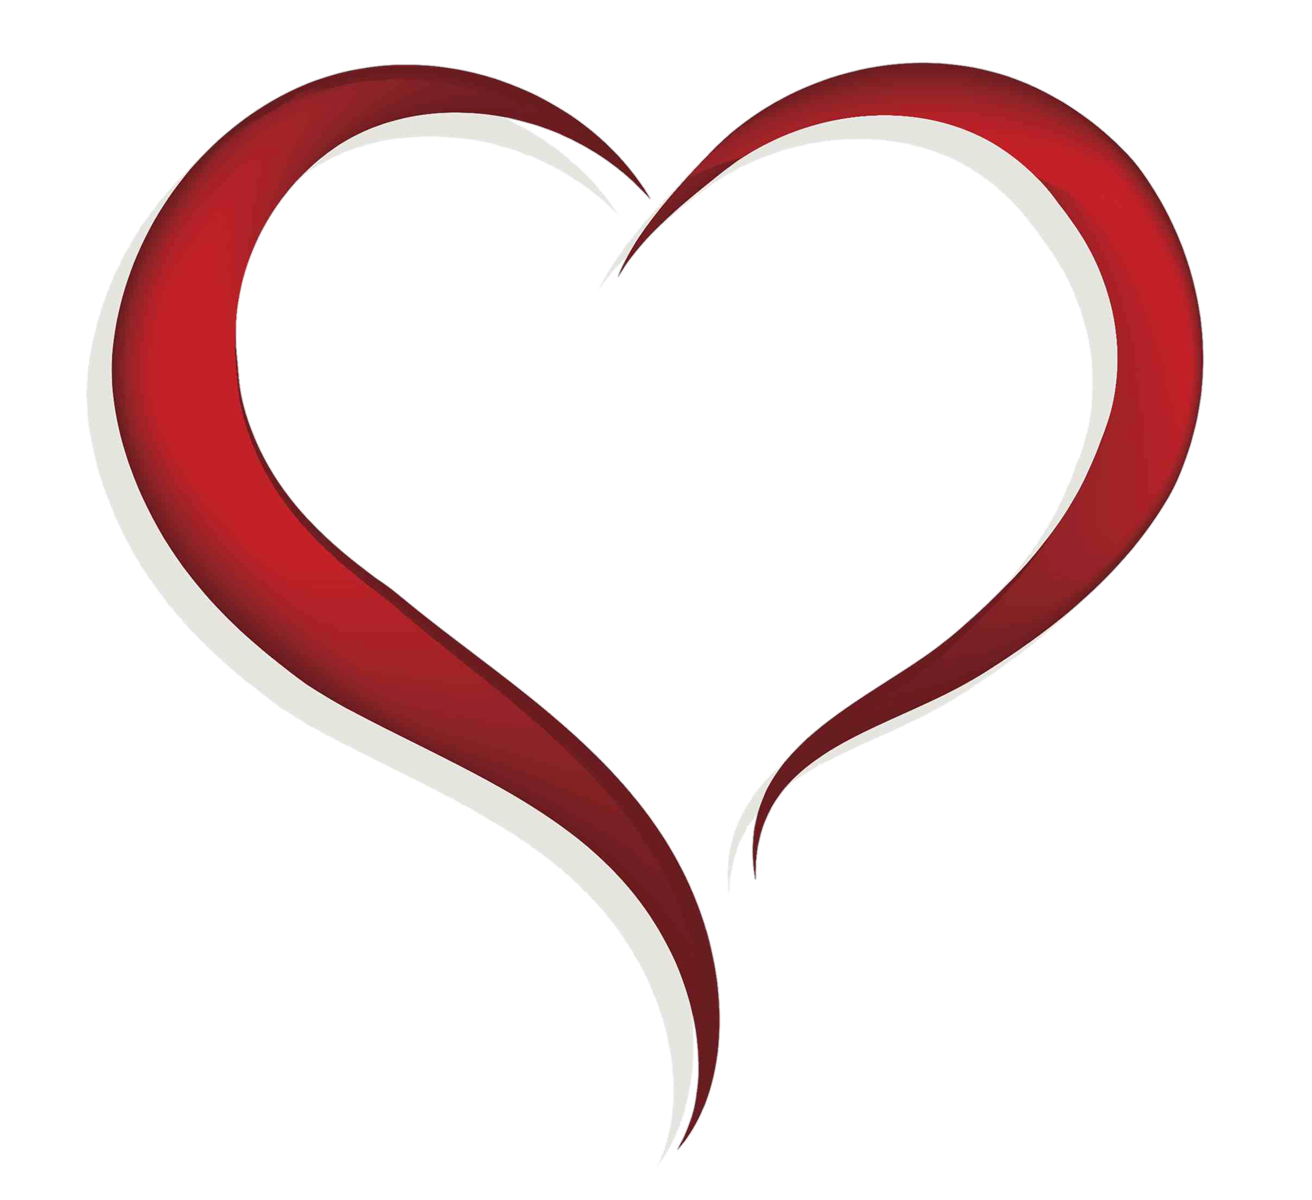 Home Objects Heart Heart Clipart Png Image Transparent